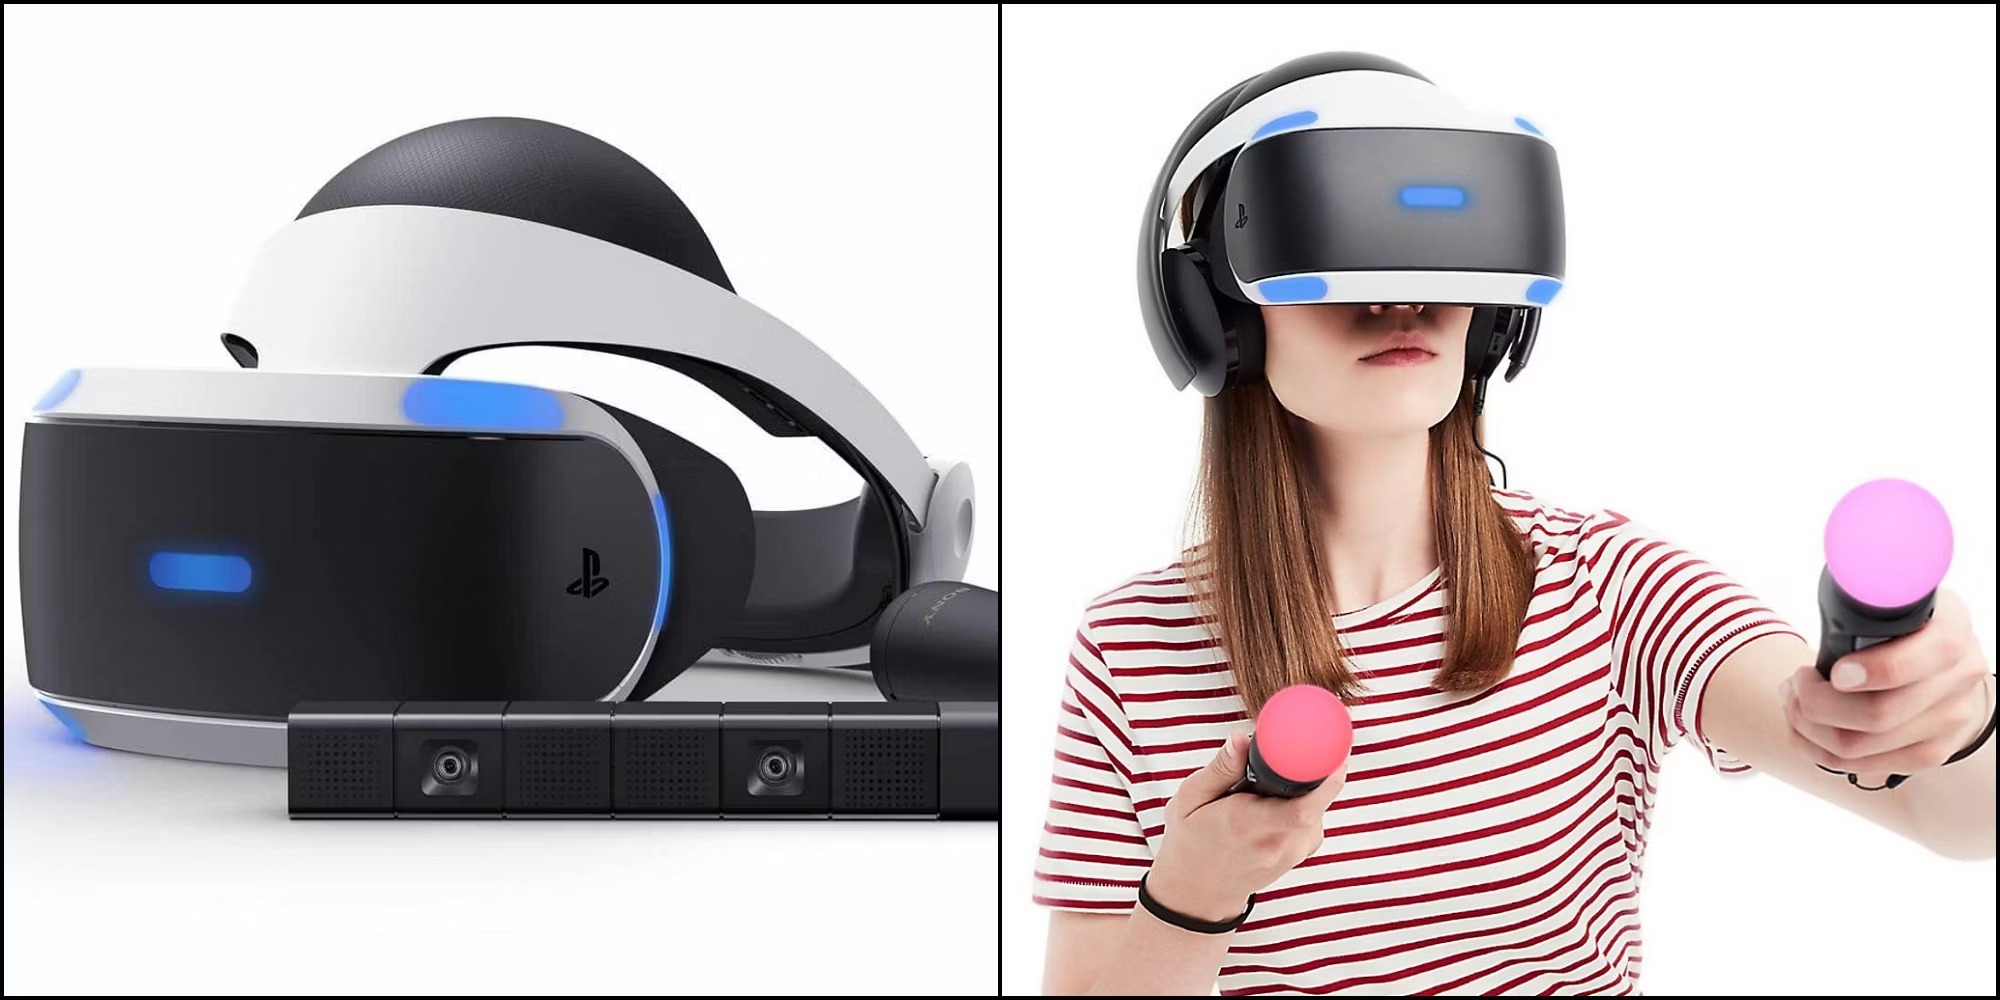 Do You Need A TV For PlayStation VR?